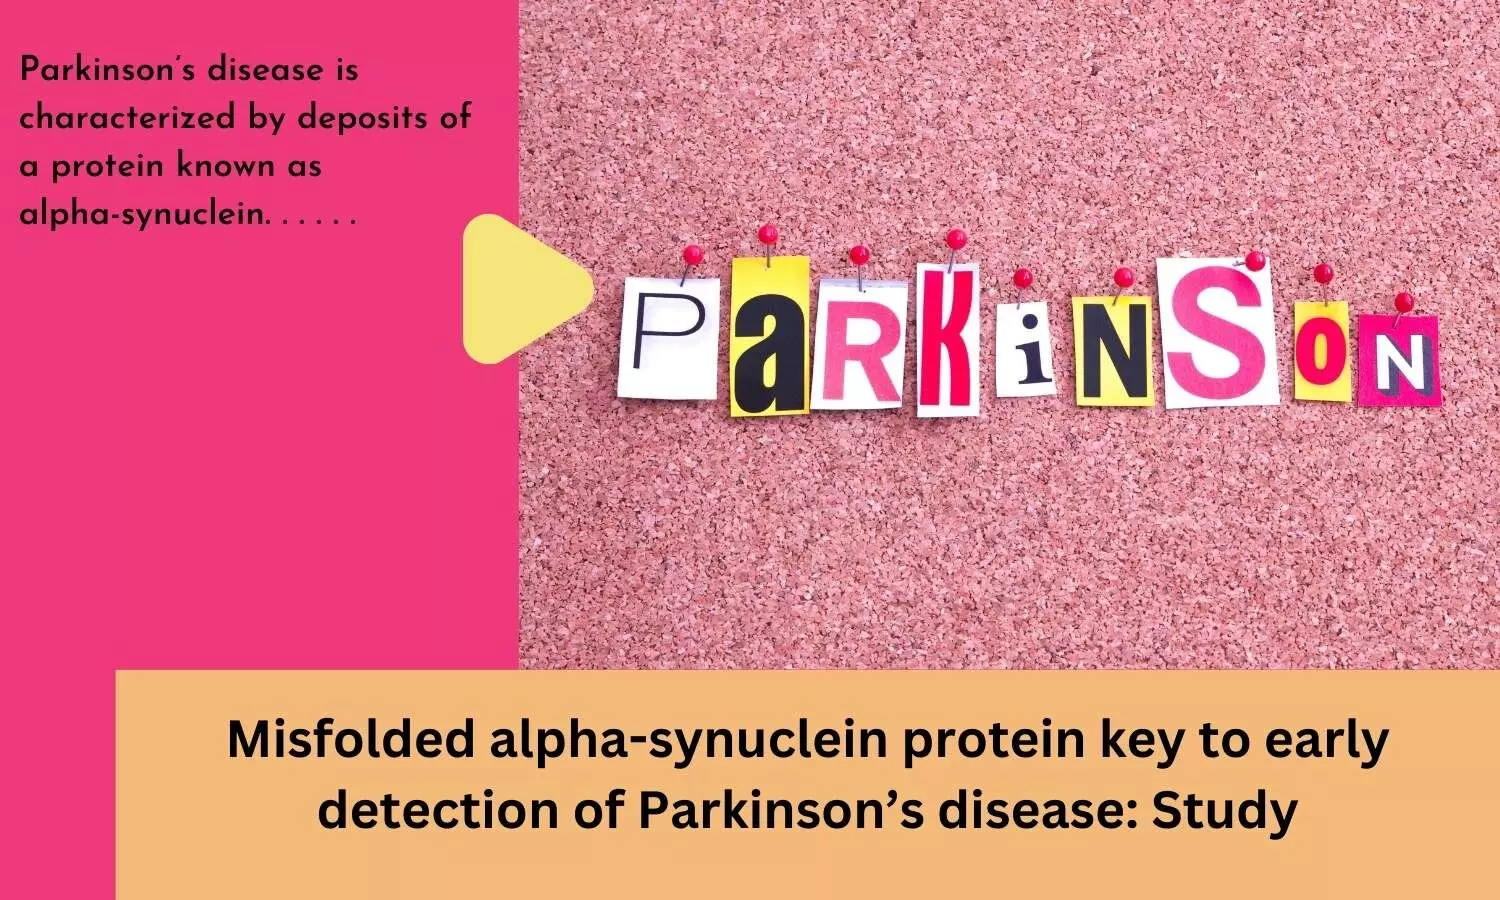 Misfolded alpha-synuclein protein key to early detection of Parkinsons disease: Study